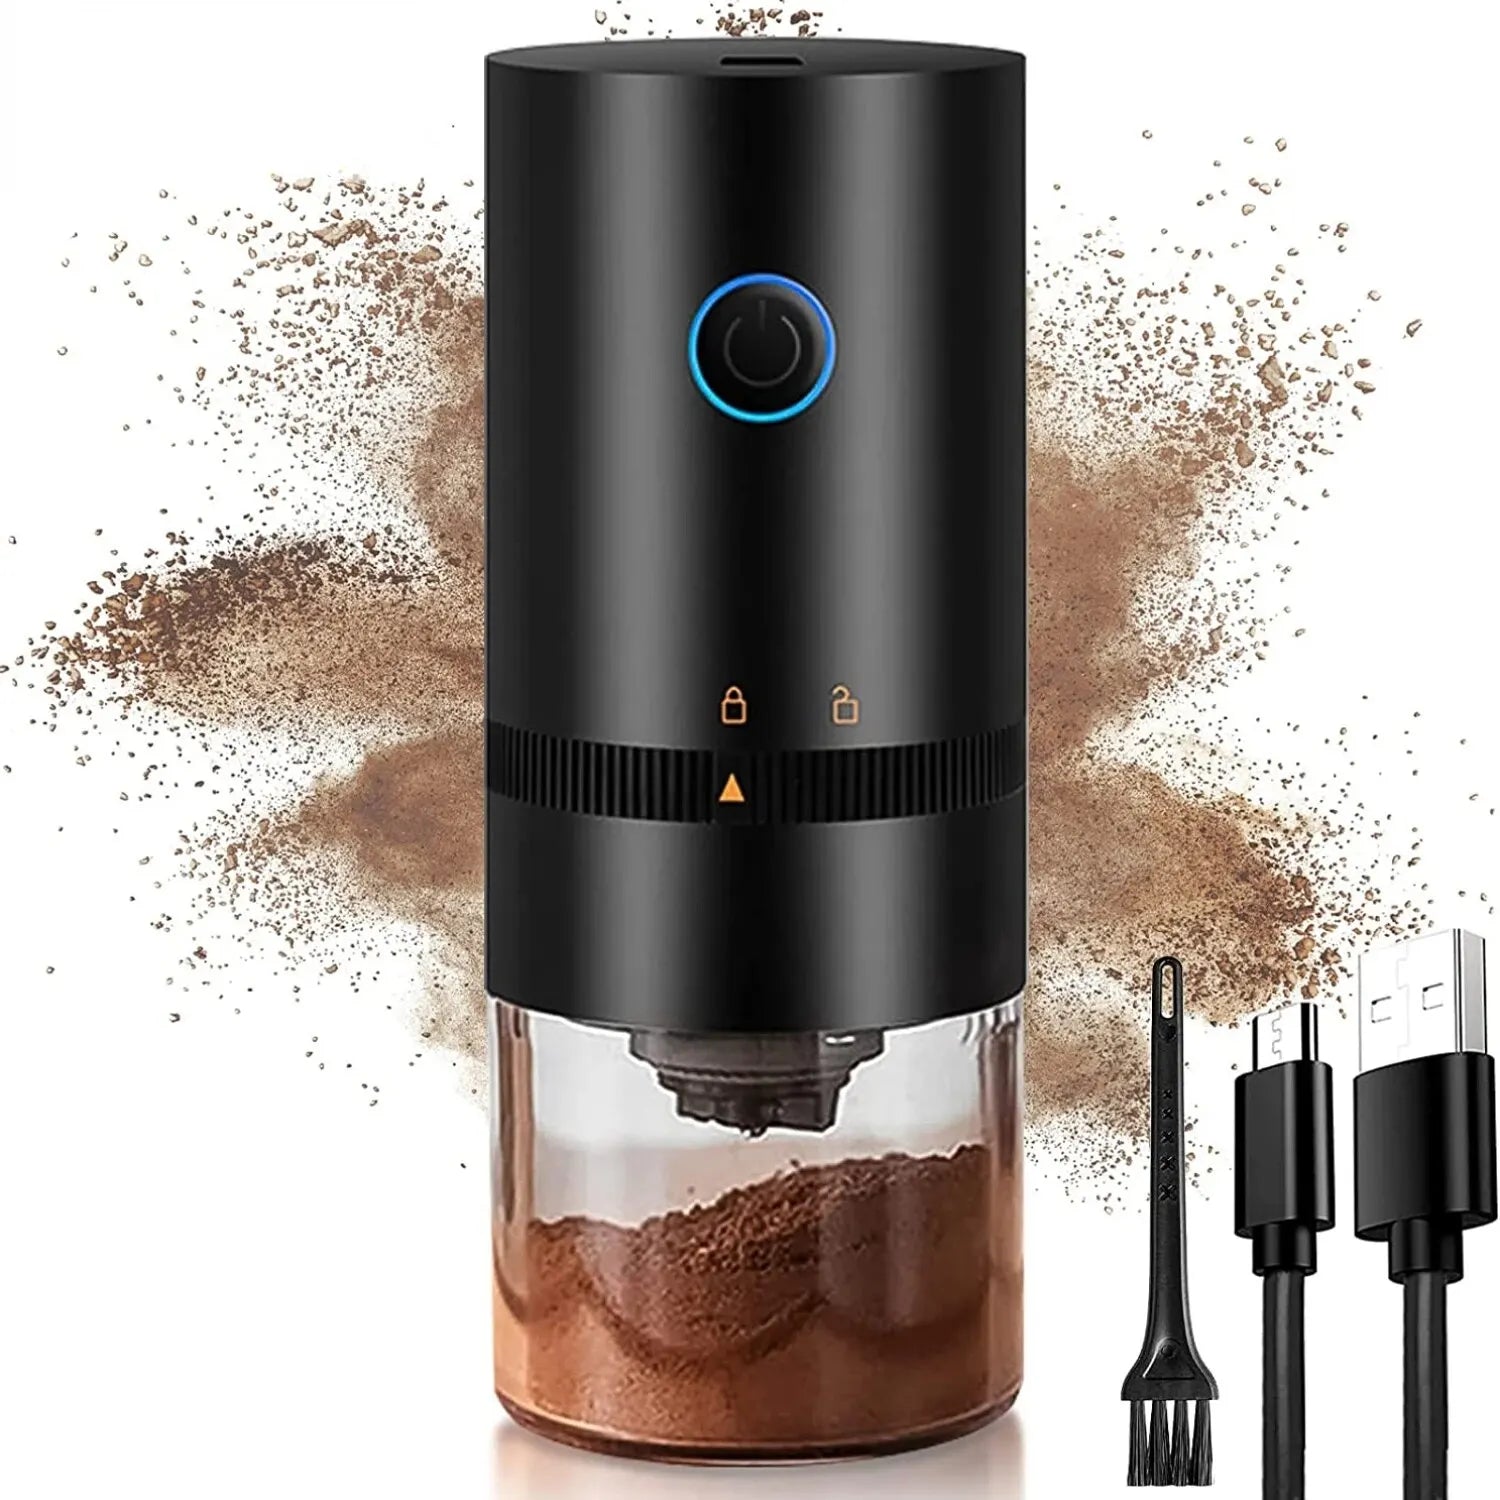 Coffee Grinder TYPE C USB Charge Professional Ceramic Grinding Core Coffee Beans Mill Grinder New Upgrade Portable Electric